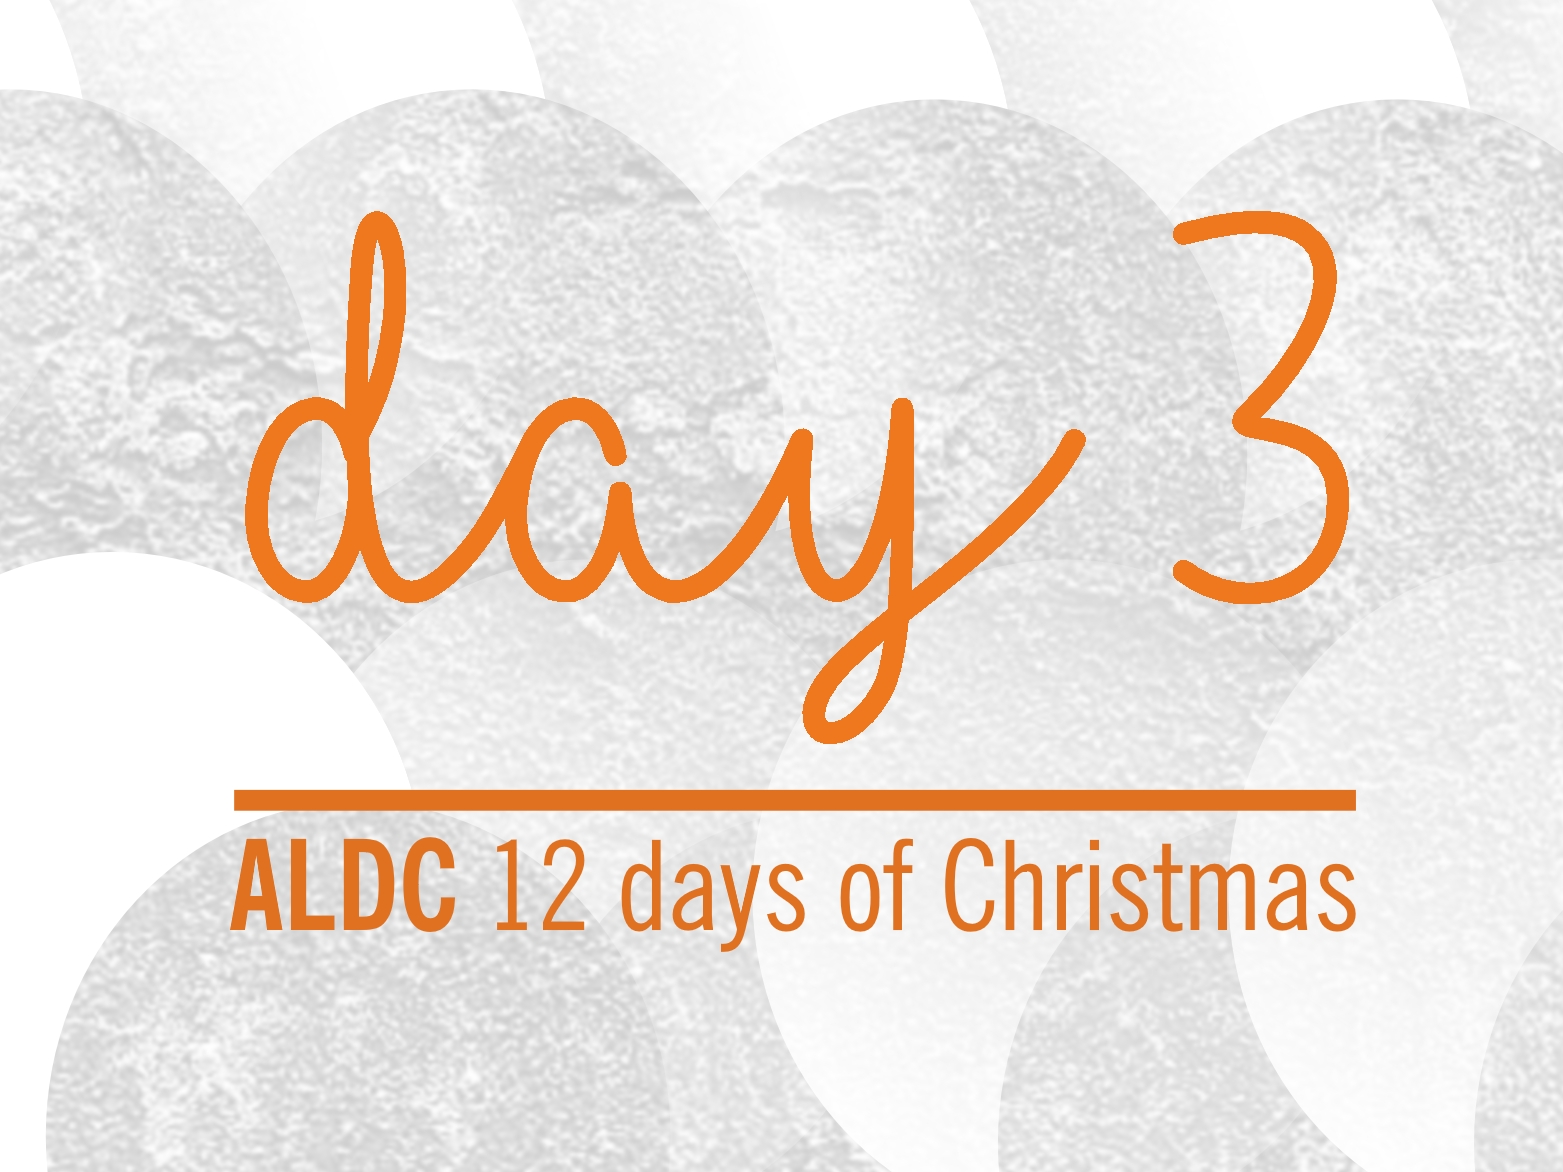 On the third day of Christmas, ALDC gave to me…